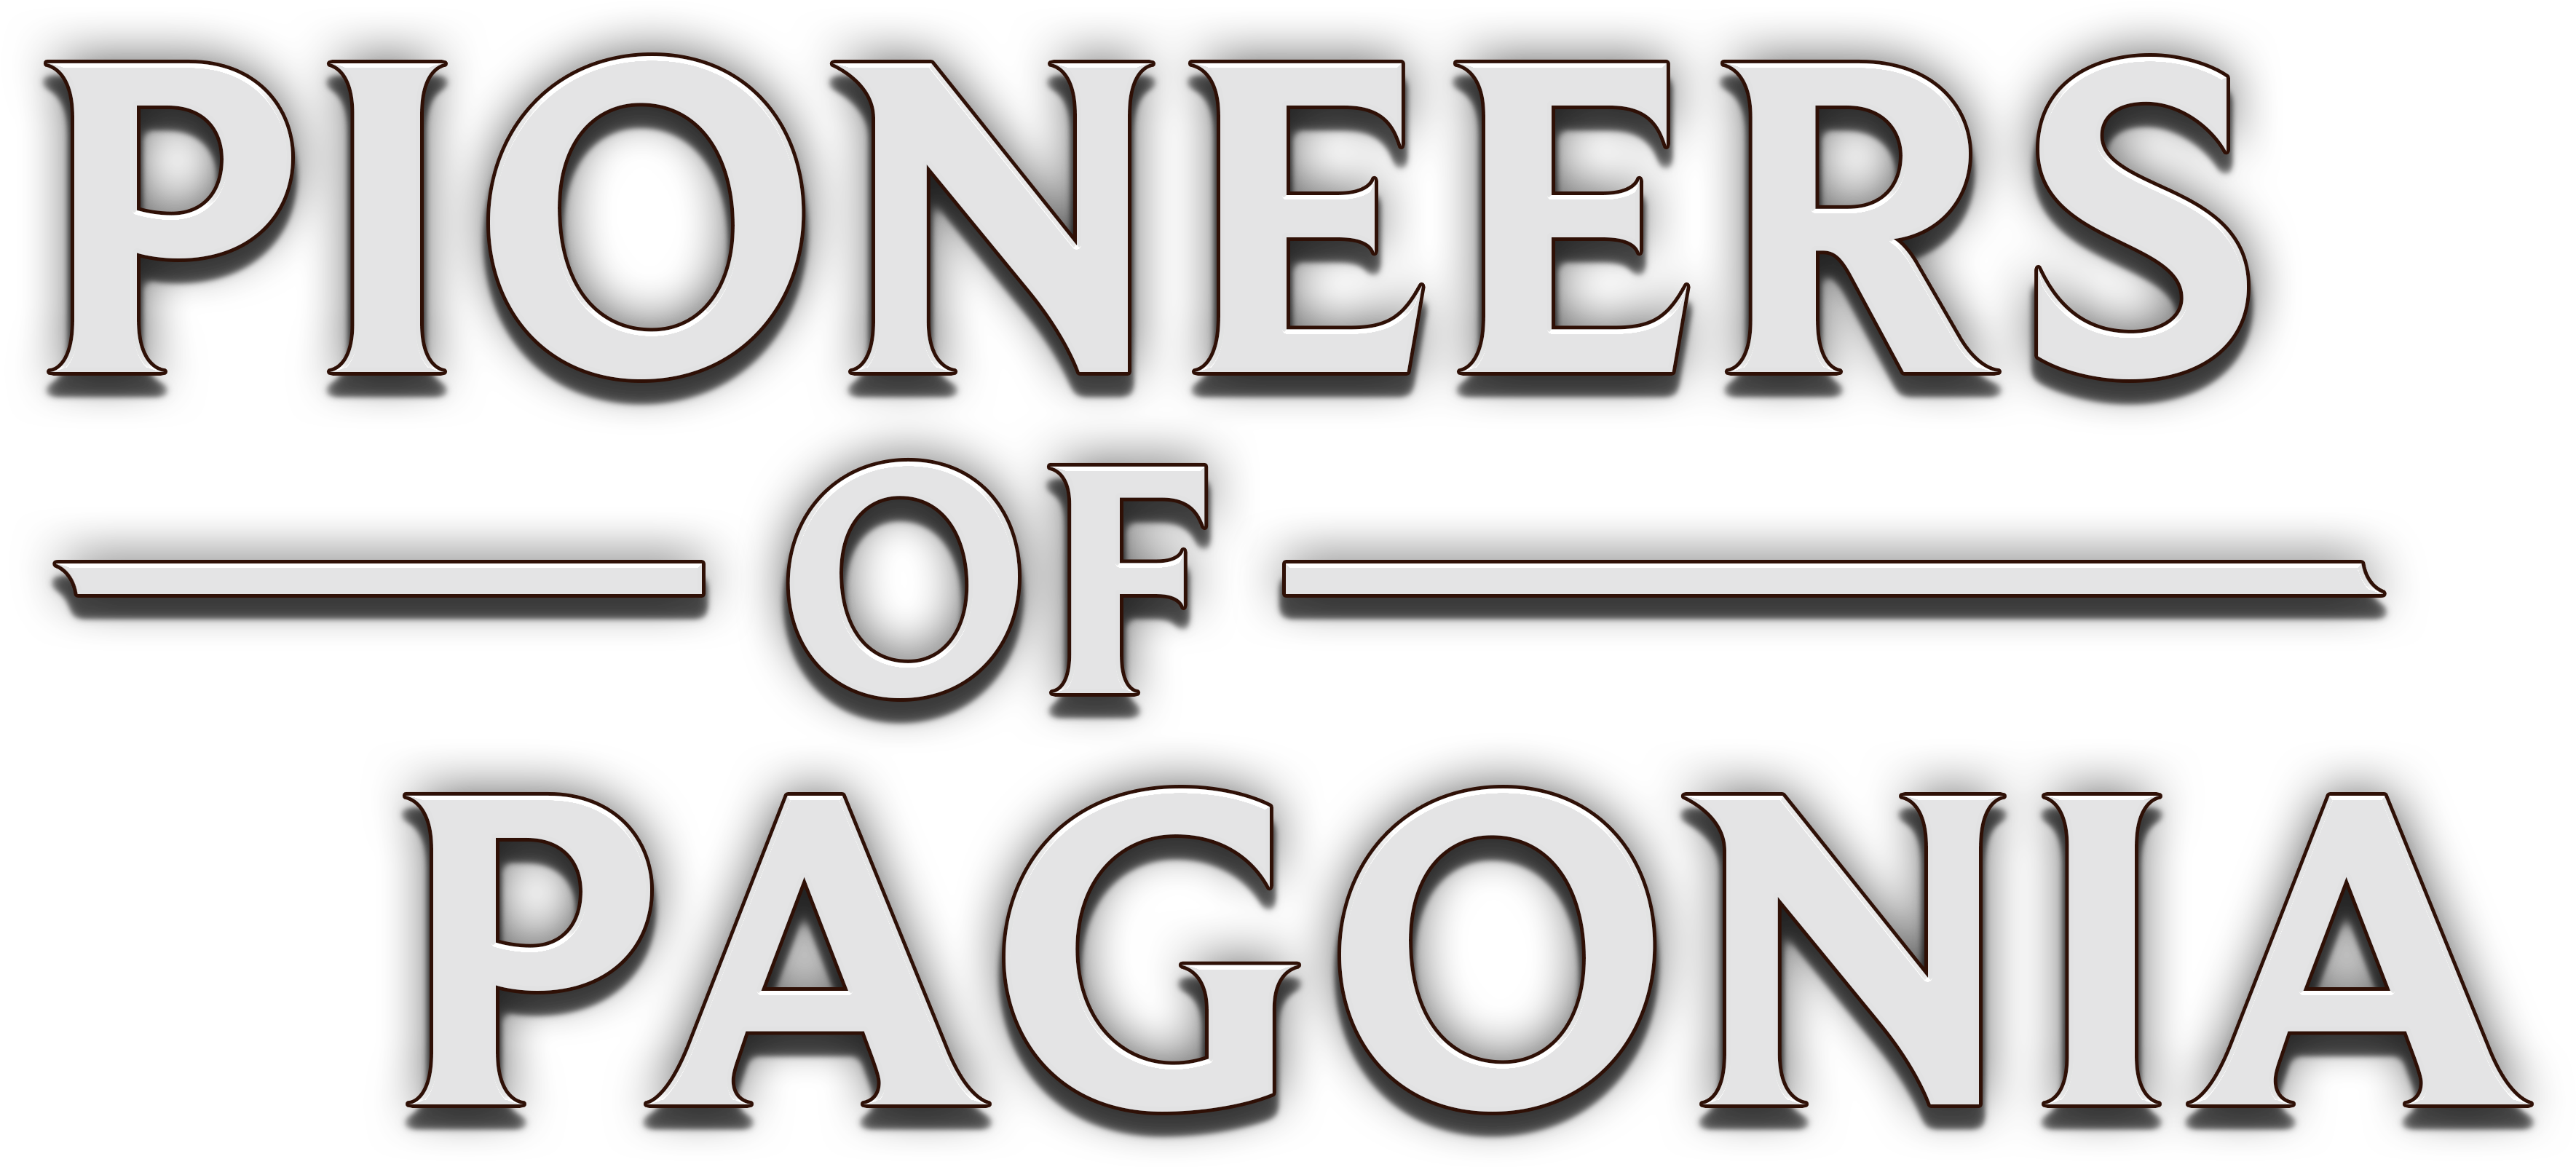 Pioneers of Pagonia, text logo, all in white